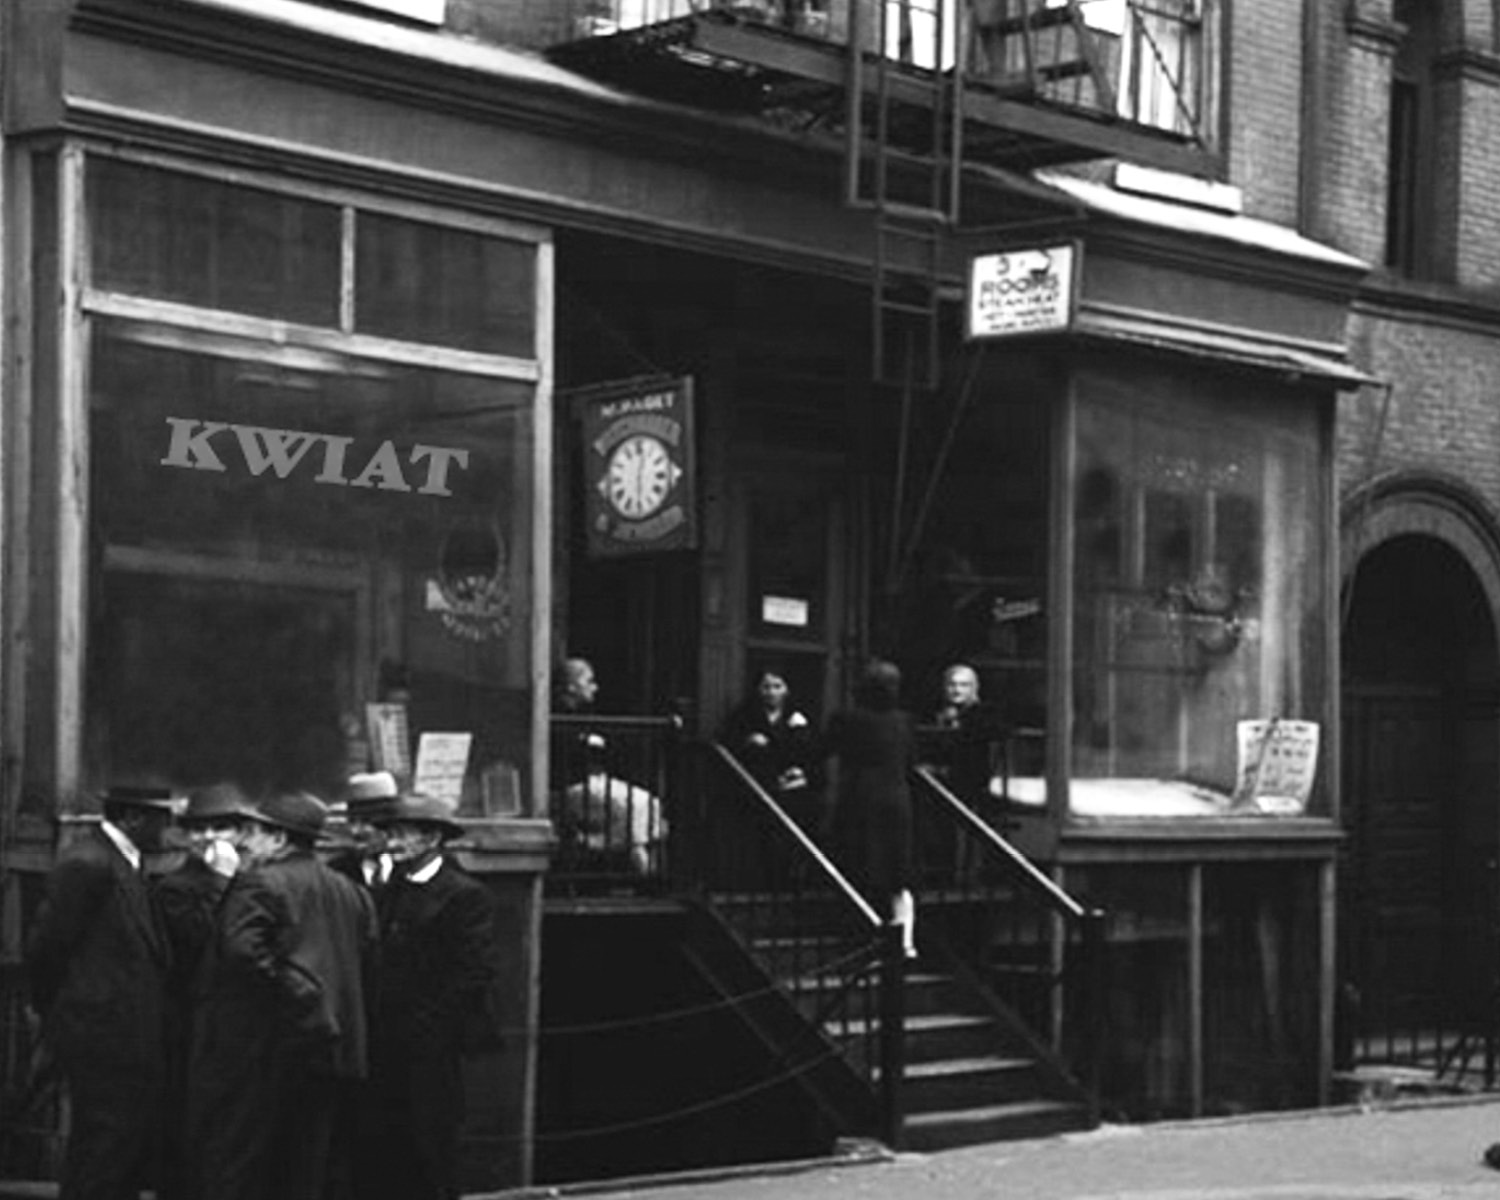 Kwiat NYC storefront in 1907